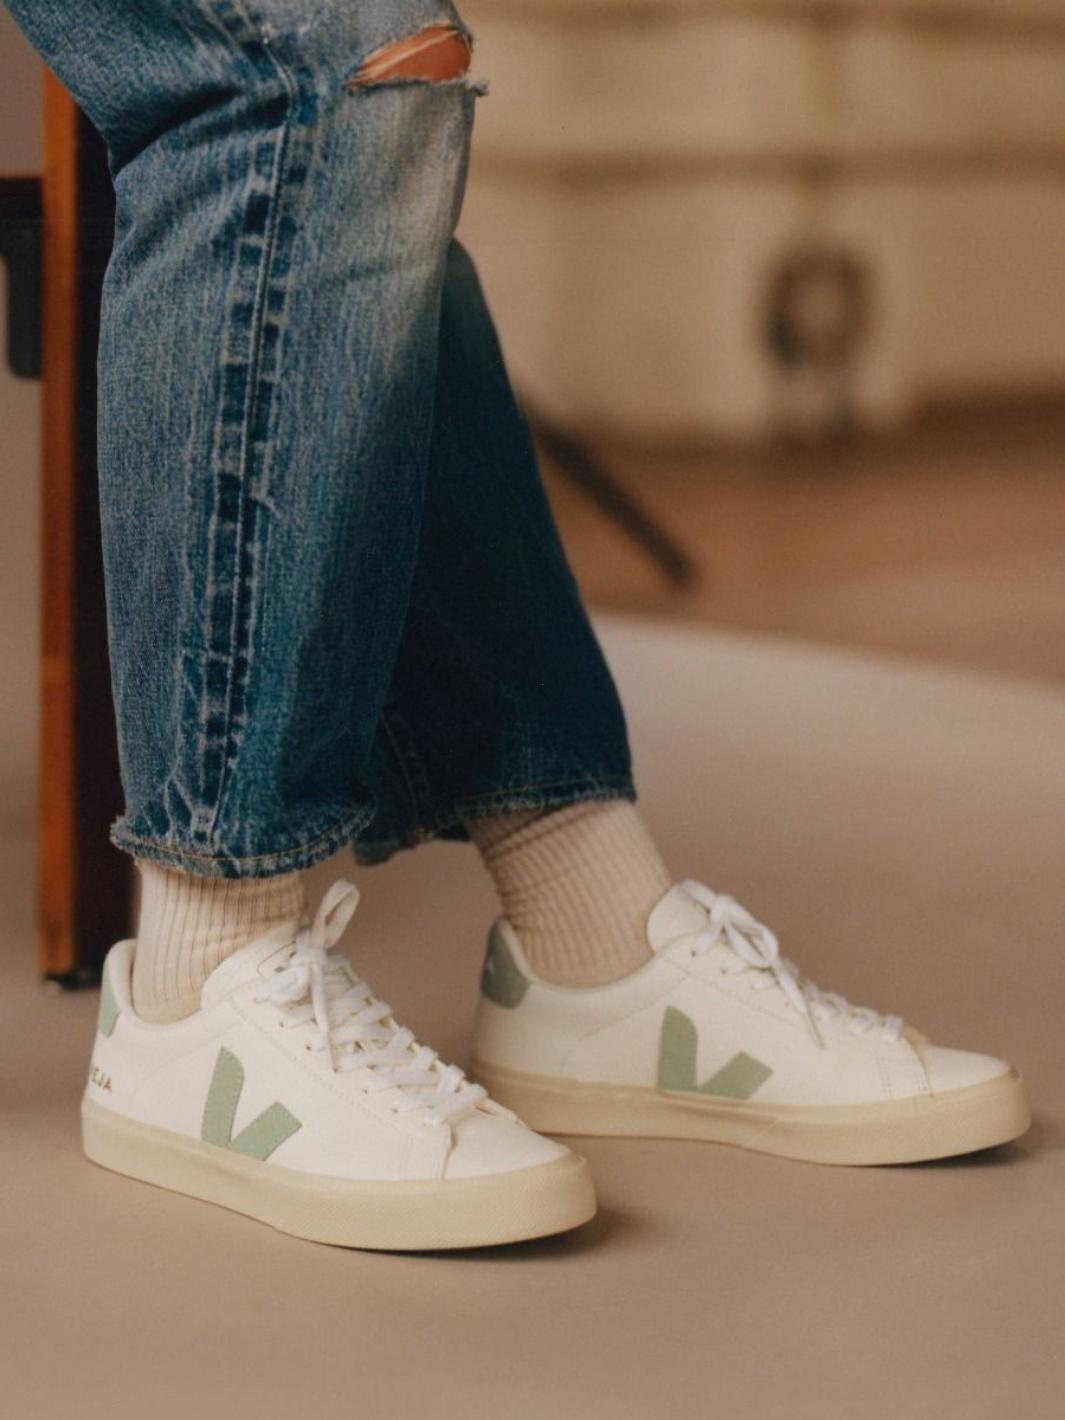 Veja Shoes Sneakers | Campo Chromefree Matcha